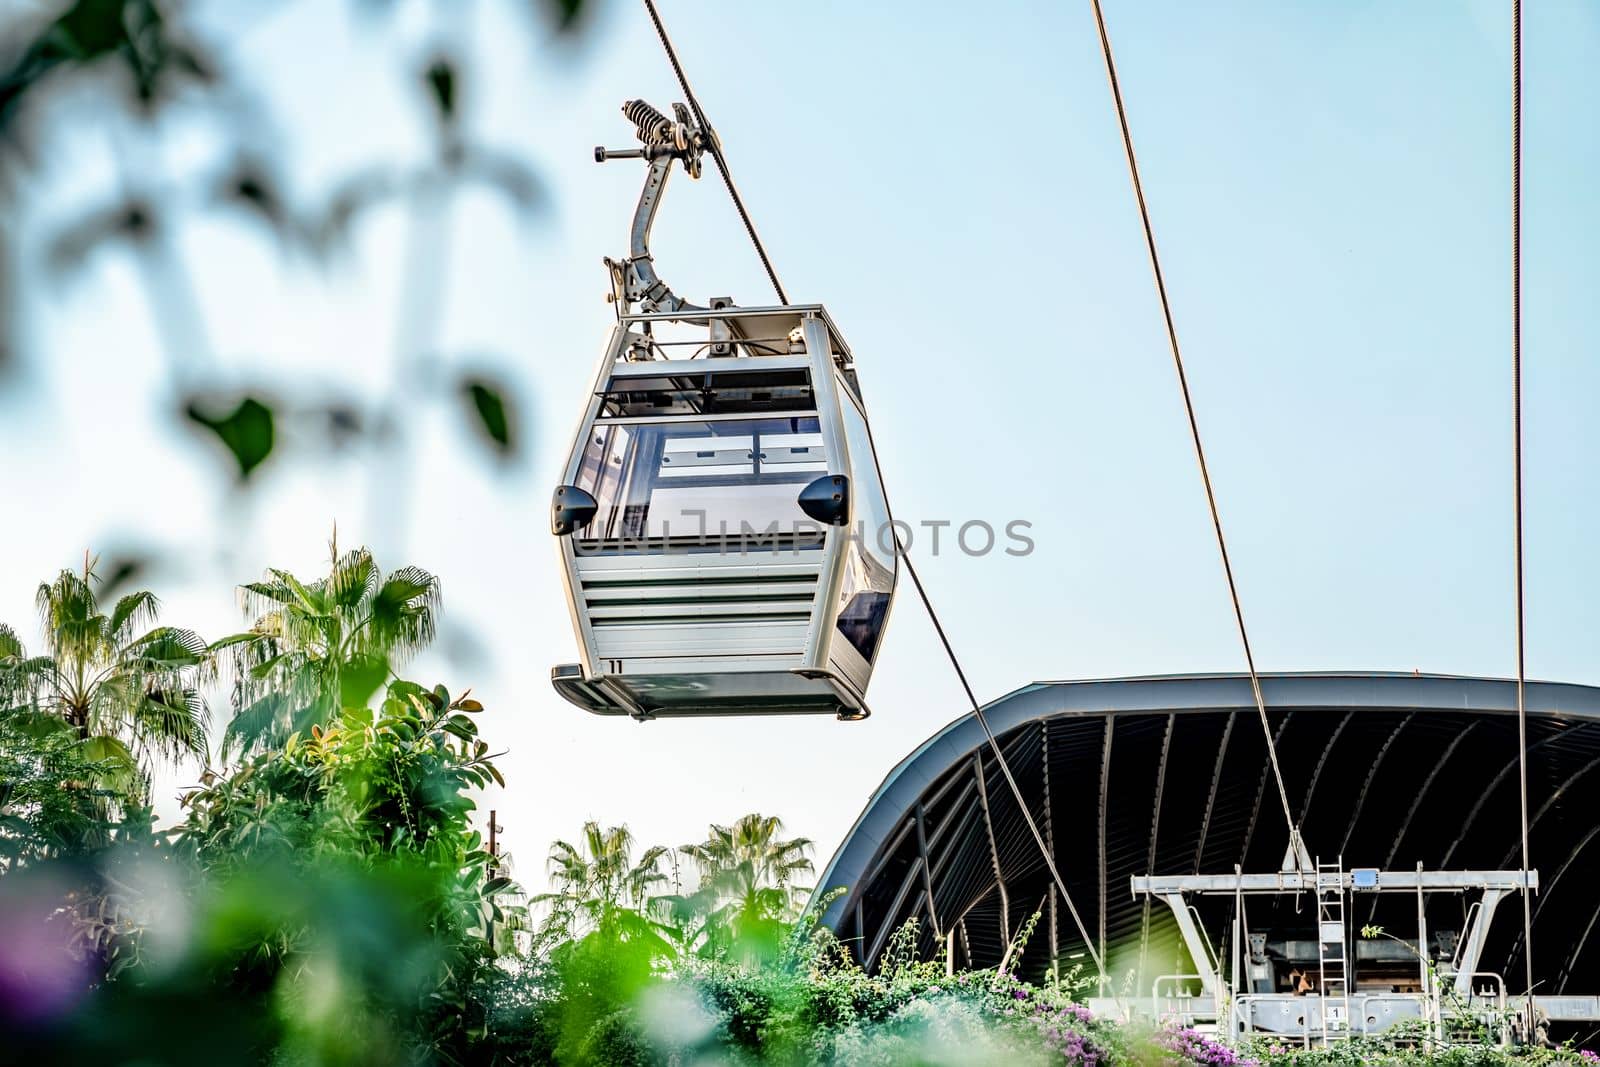 Cable car cab approaching landing station on Cleopatra beach, close-up